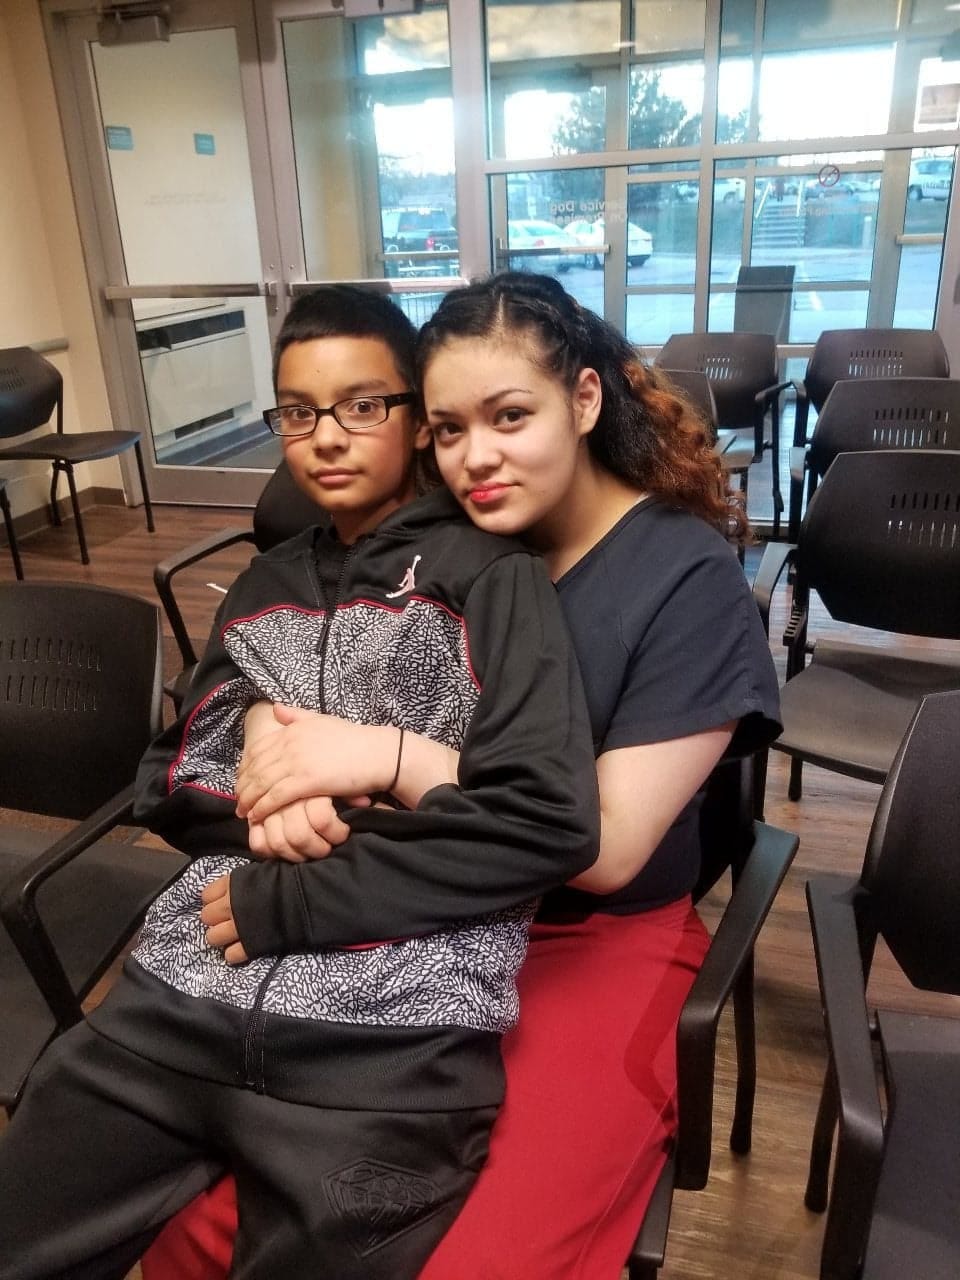 Maricella Chairez, 16, wraps her arms around her brother in the last picture they took together Dec. 8, 2017. They're at the Racine County Detention Center, where she died by suicide two days later.